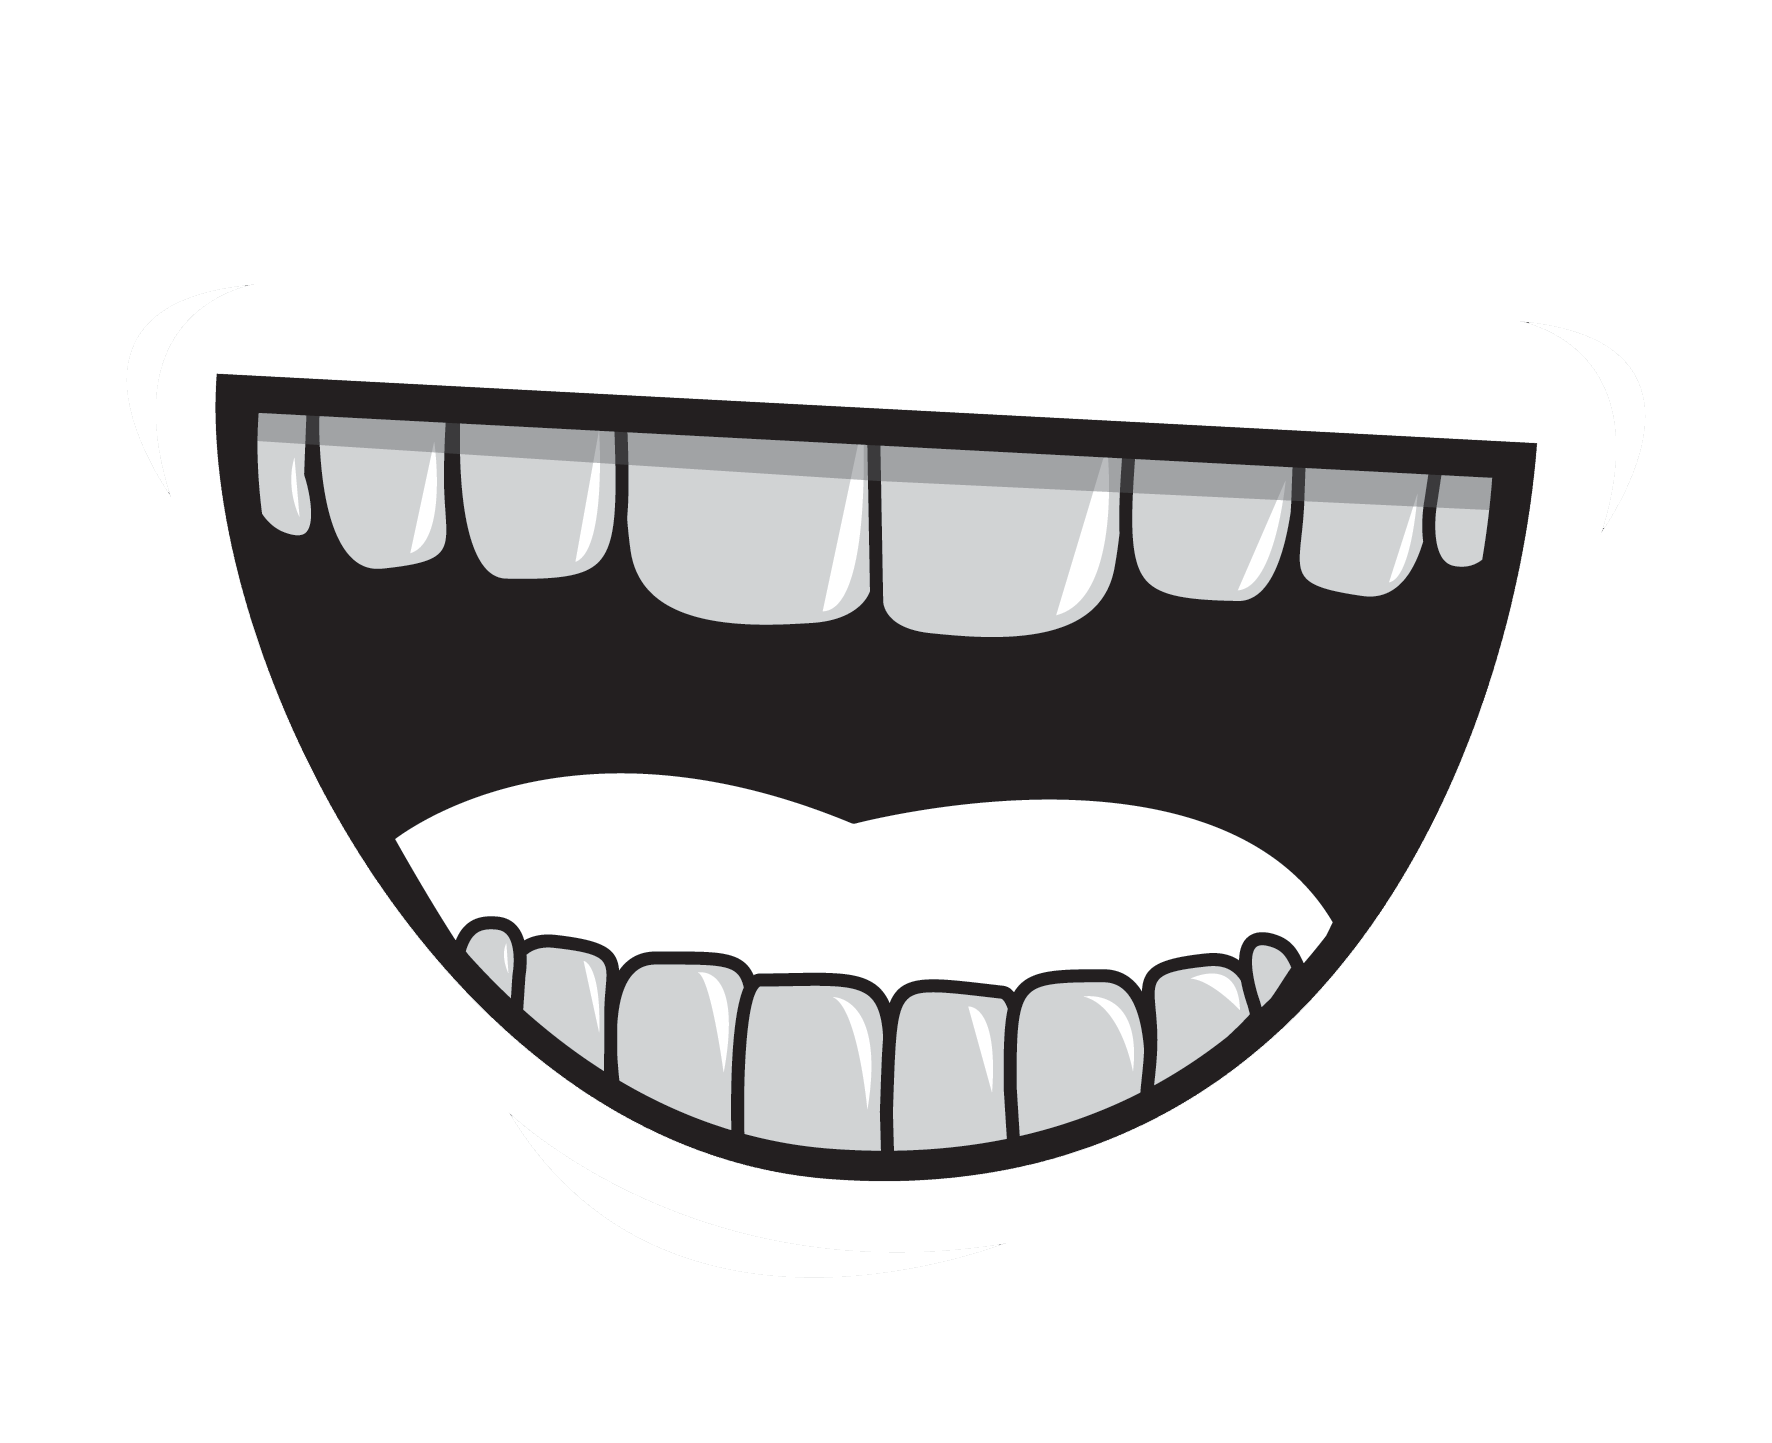 Royalty Free Mouth Cartoon Smile Png Download 17721443 Free